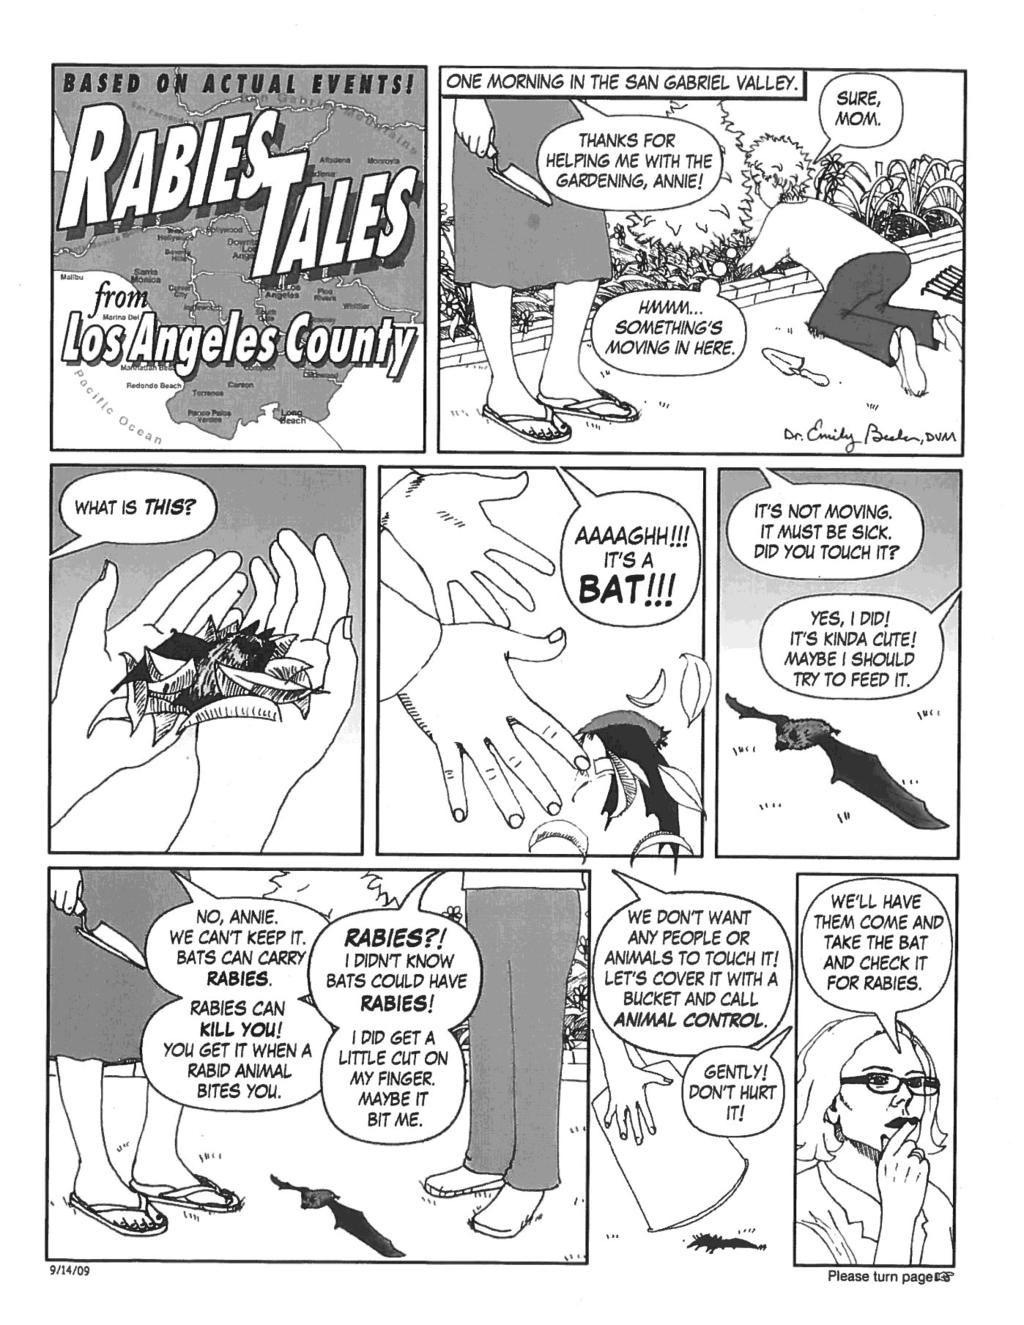 Read the comic below with your family and friends to learn more about rabies. Is that a bat in the yard?